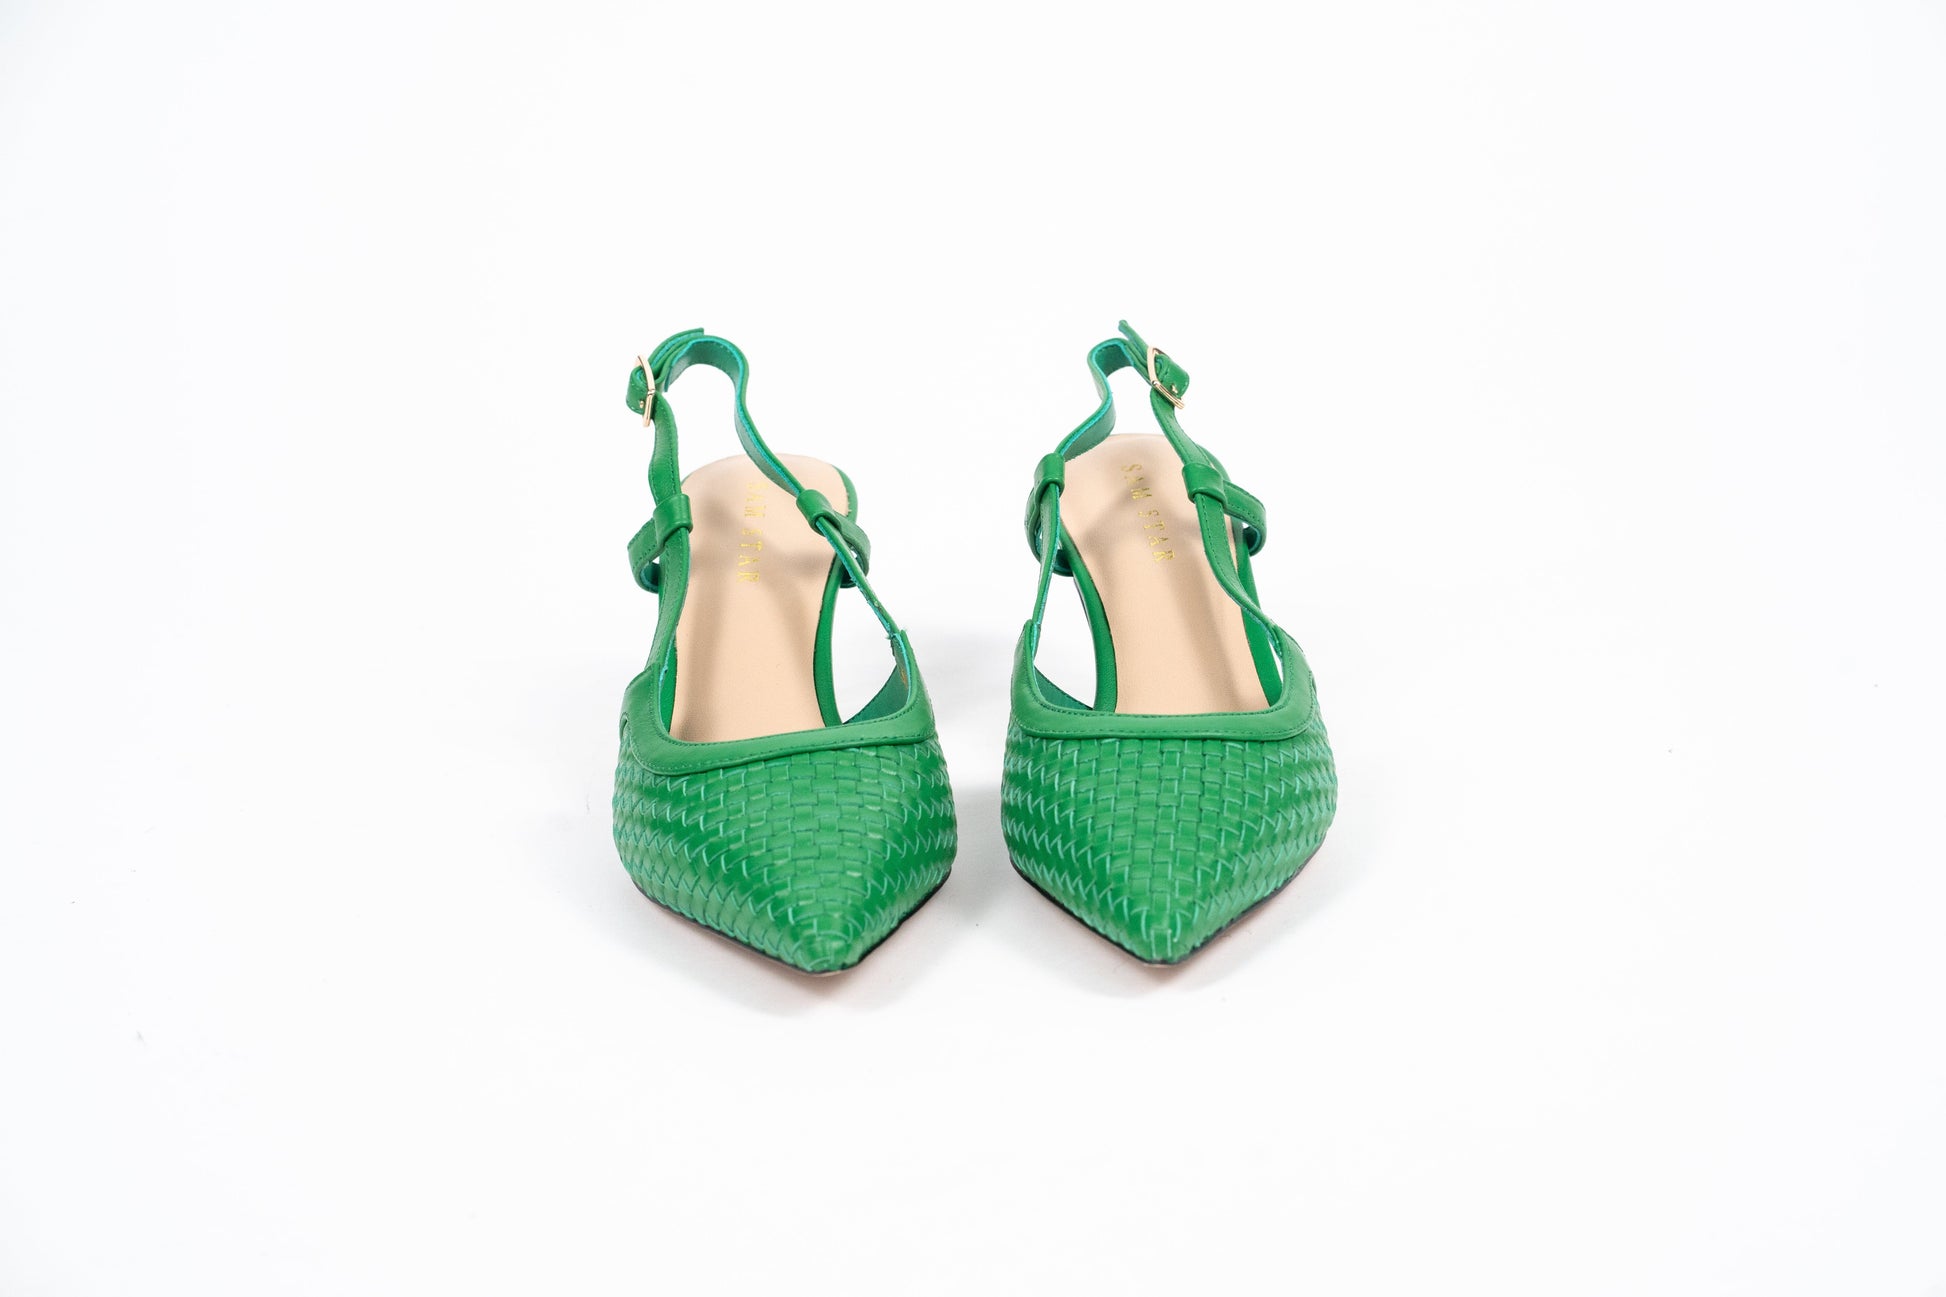 SS23010 Leather woven court shoes - Green (New Arrival) ladies shoes Sam Star shoes Green 37/4 